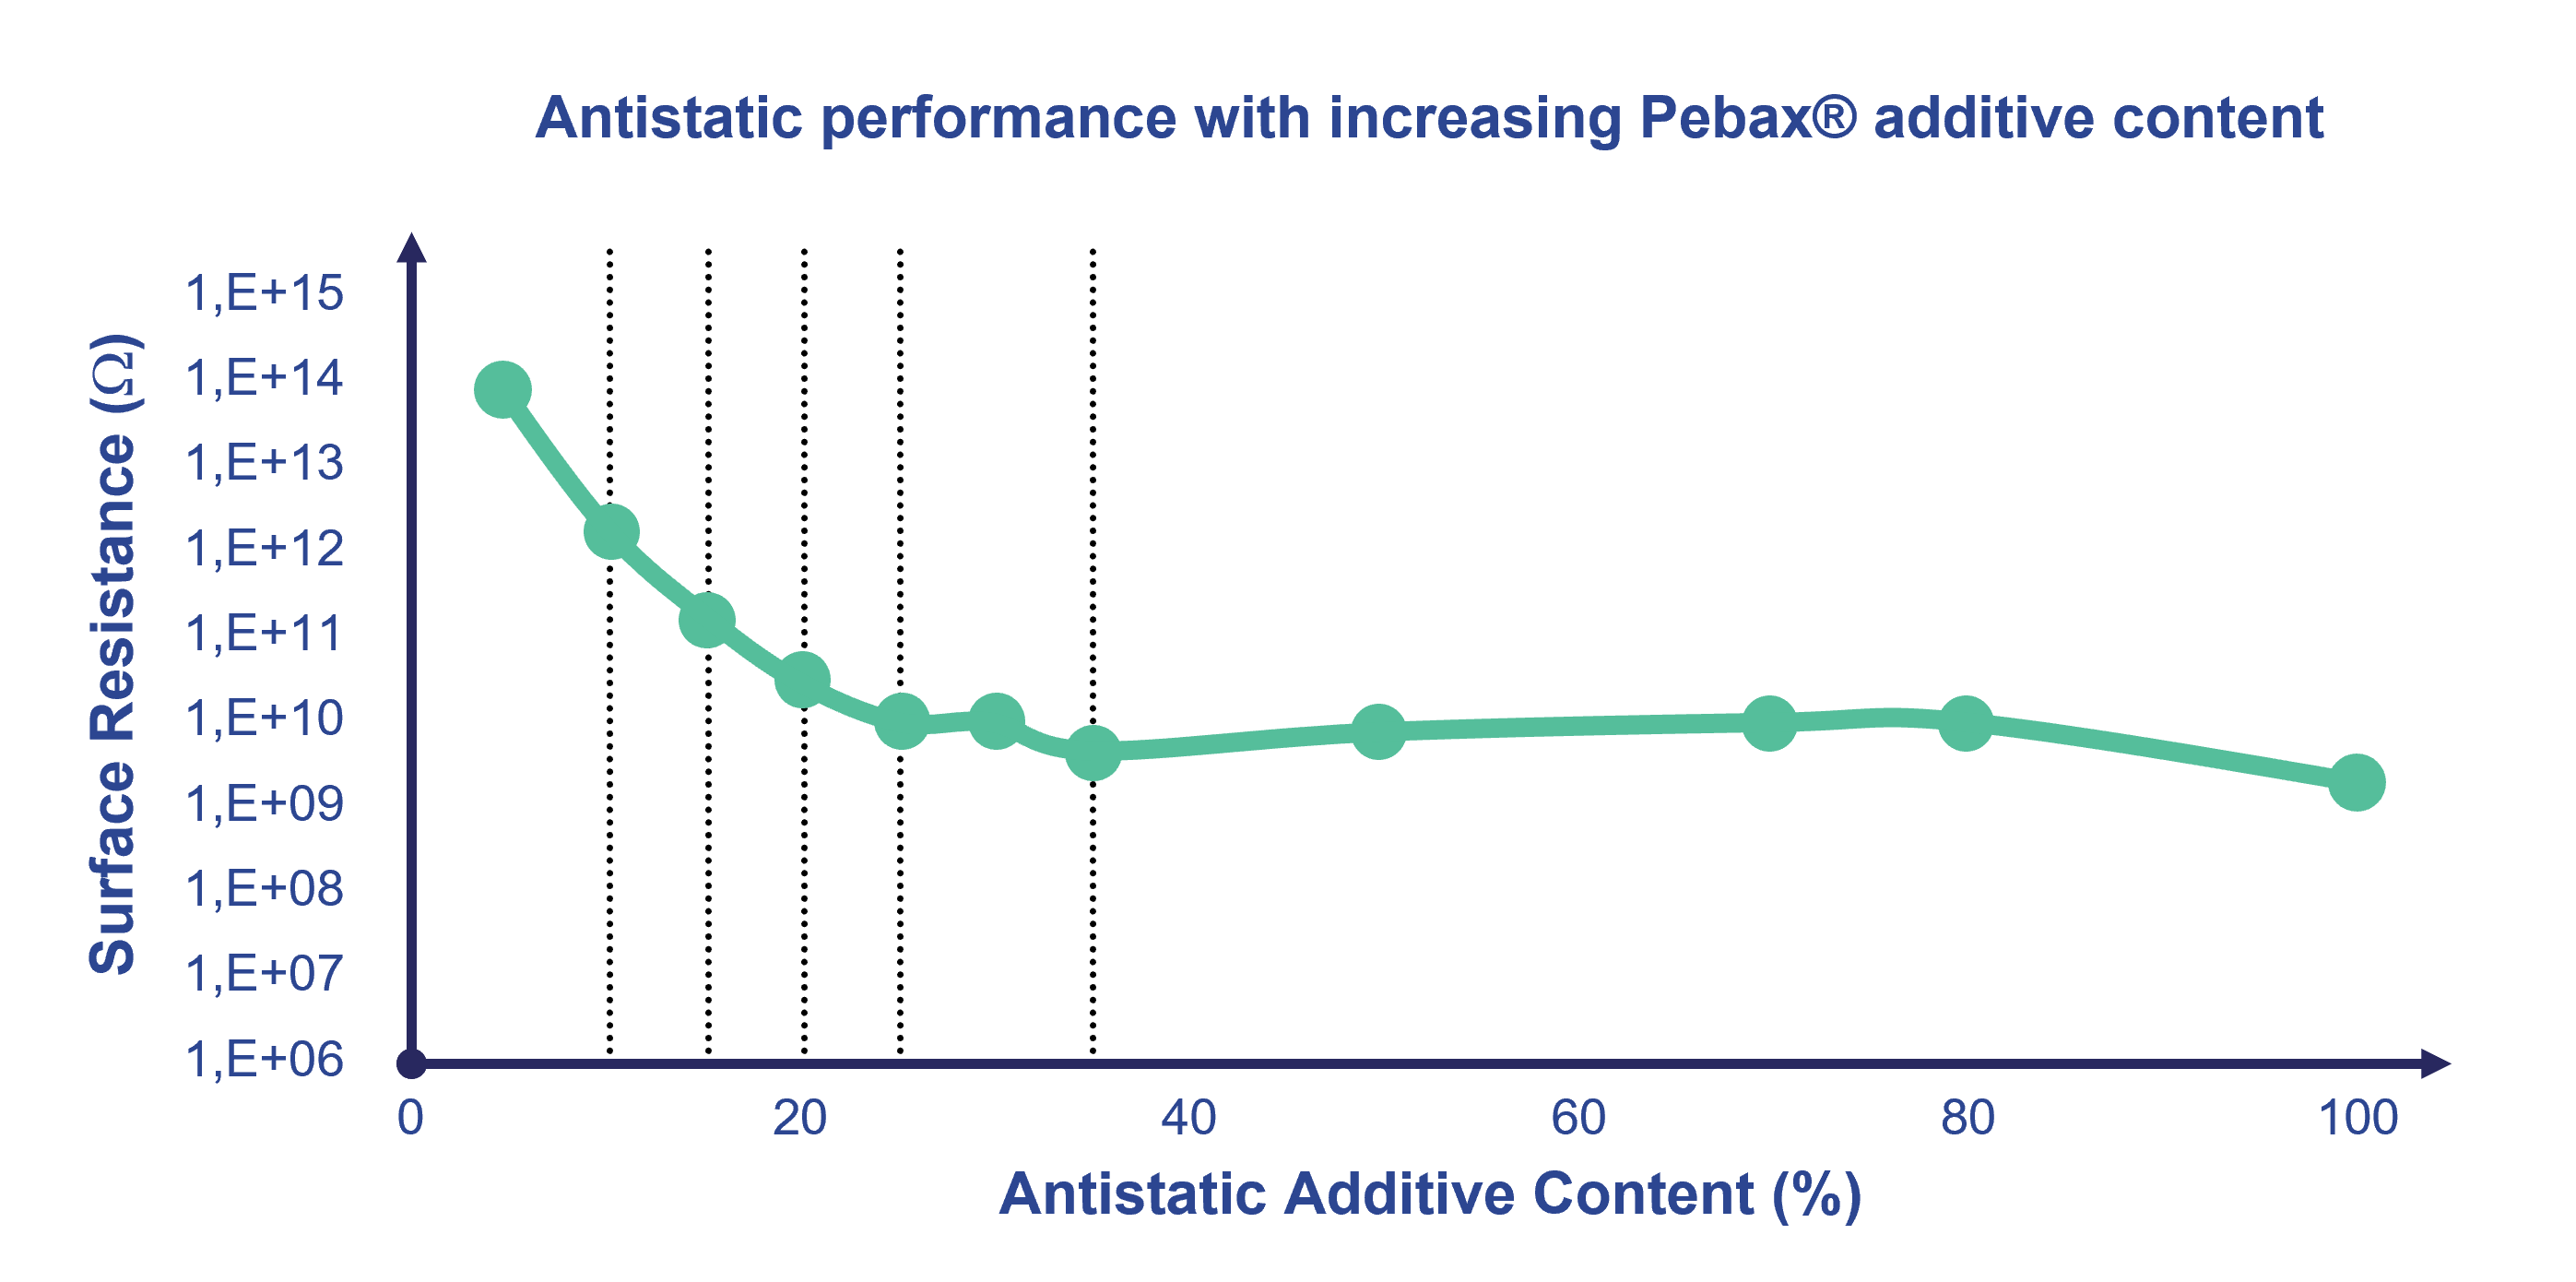 chart showing the evolution of the antistatic performance according to the amount of Pebax permanent antistatid additive. After 30% of additives, the performance reaches a plateau